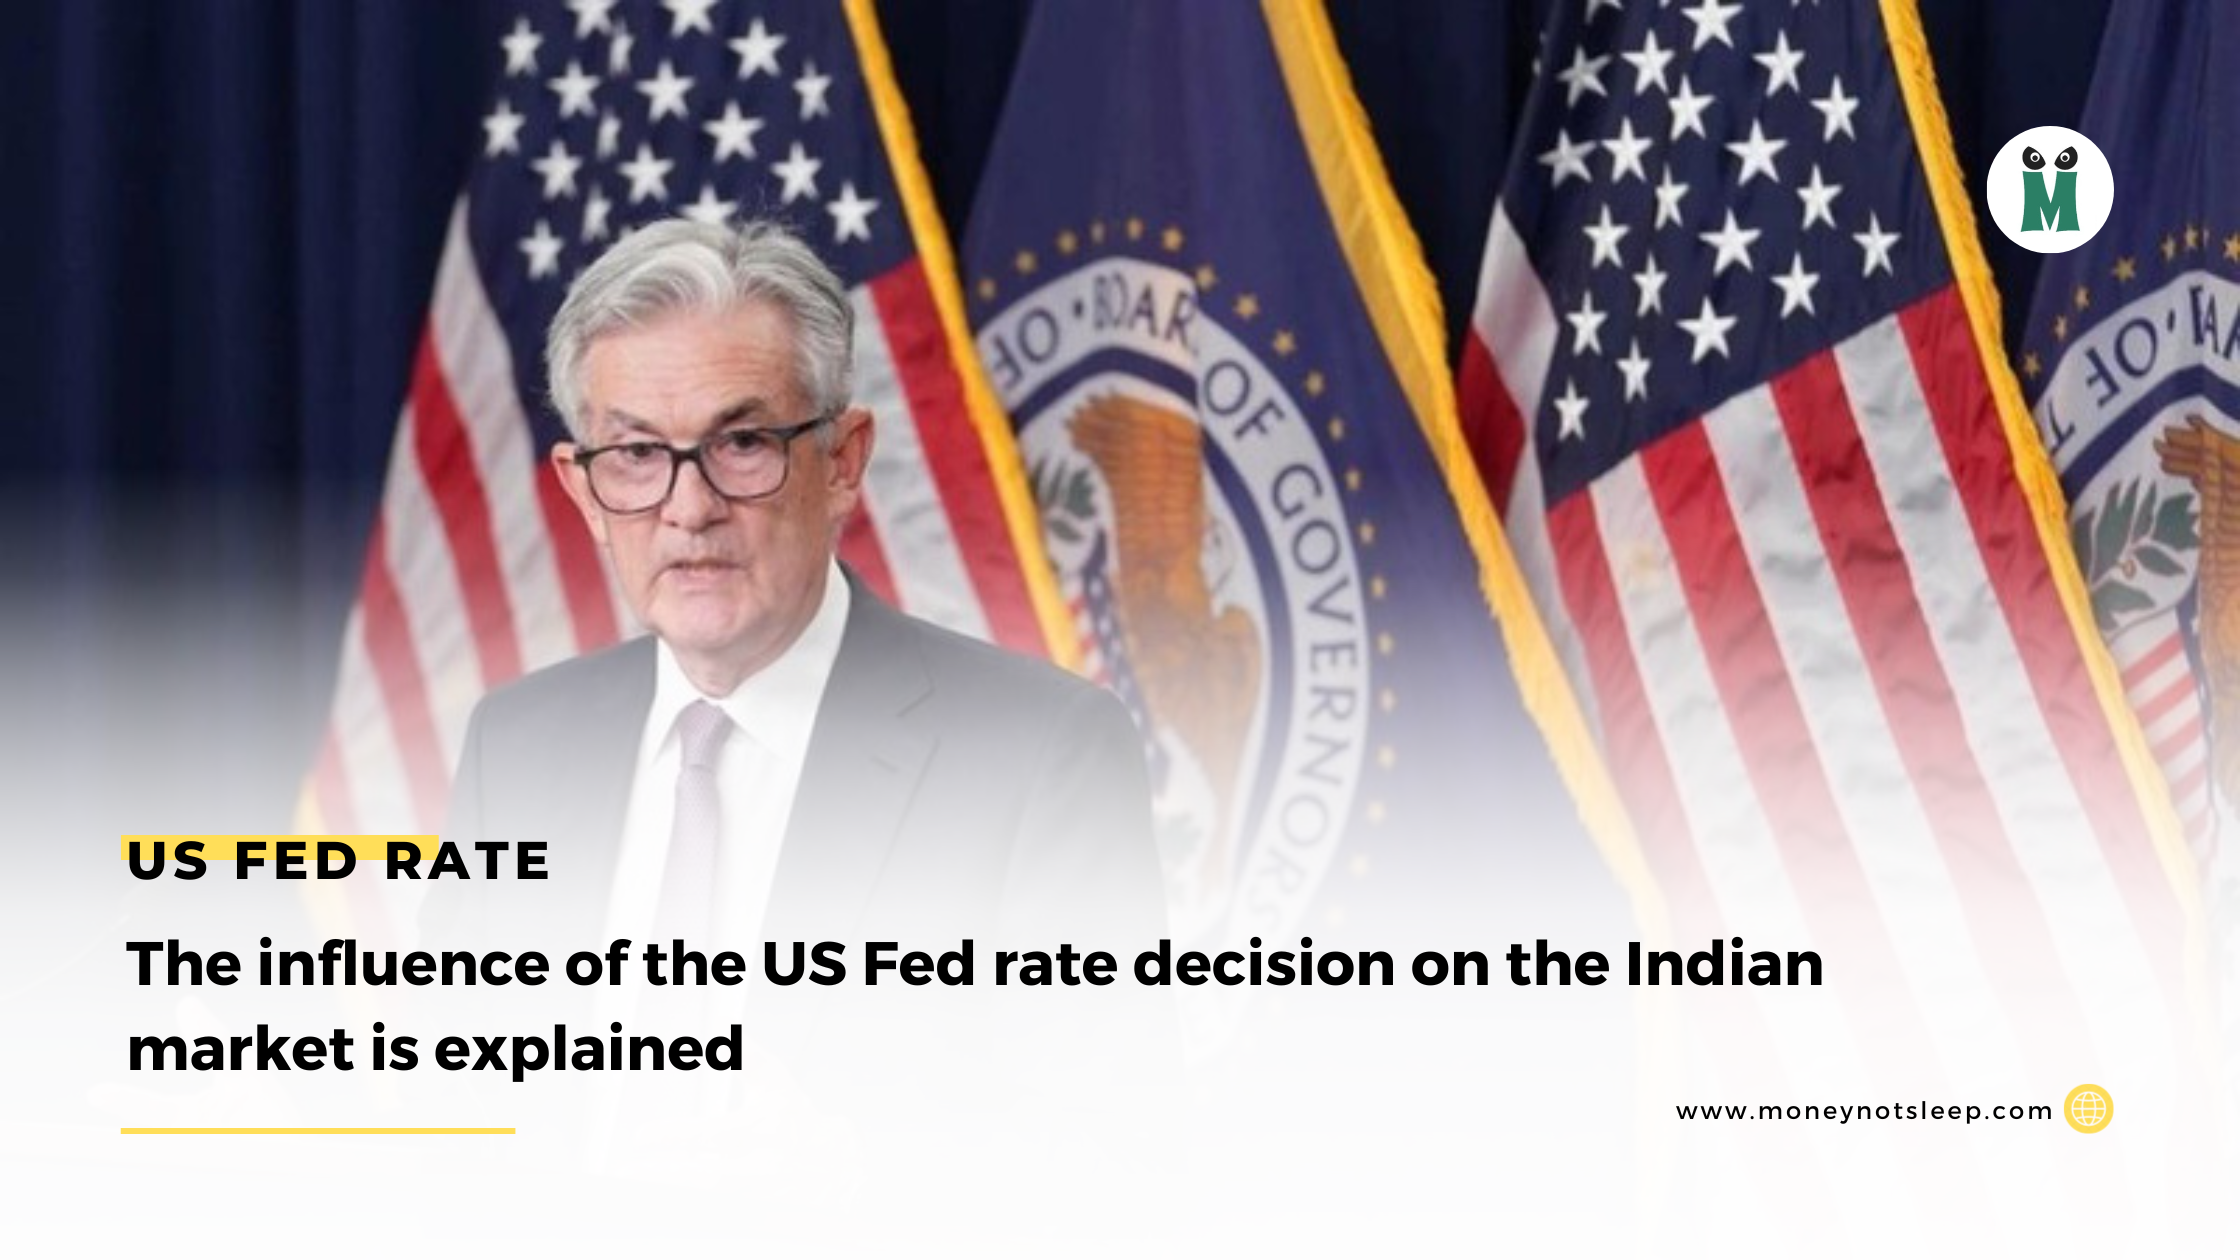 The influence of the US Fed rate decision on the Indian market is explained